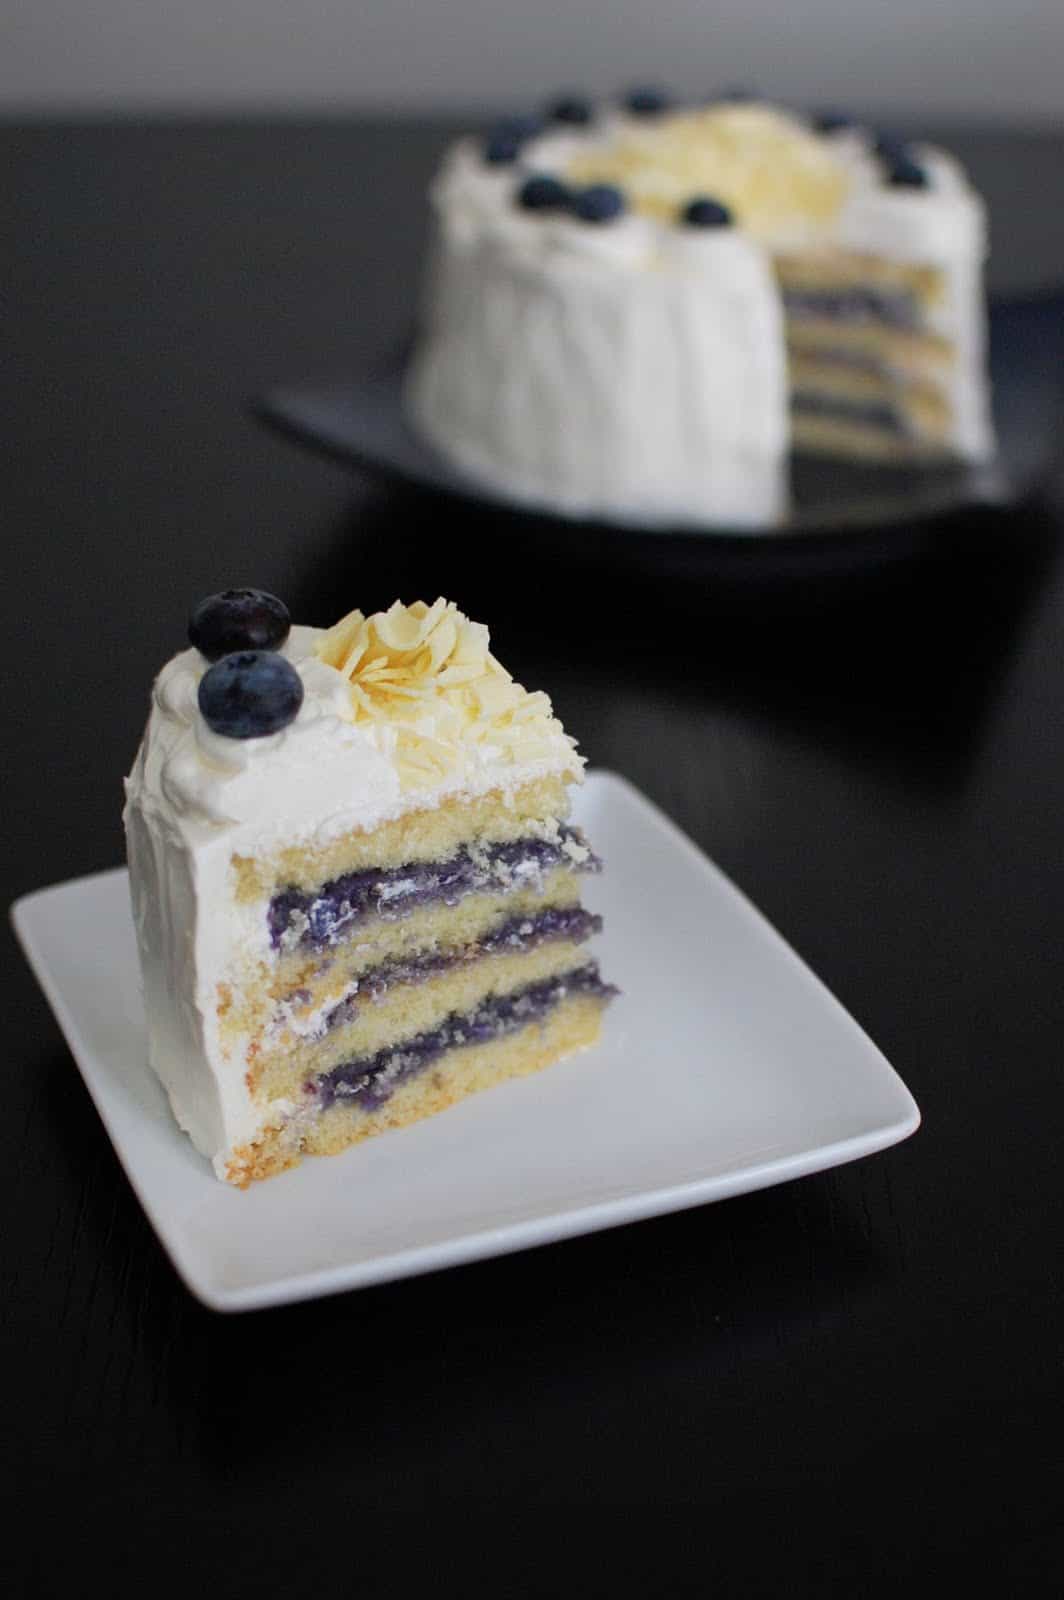 White choclate layer cake with blueberry curd filling